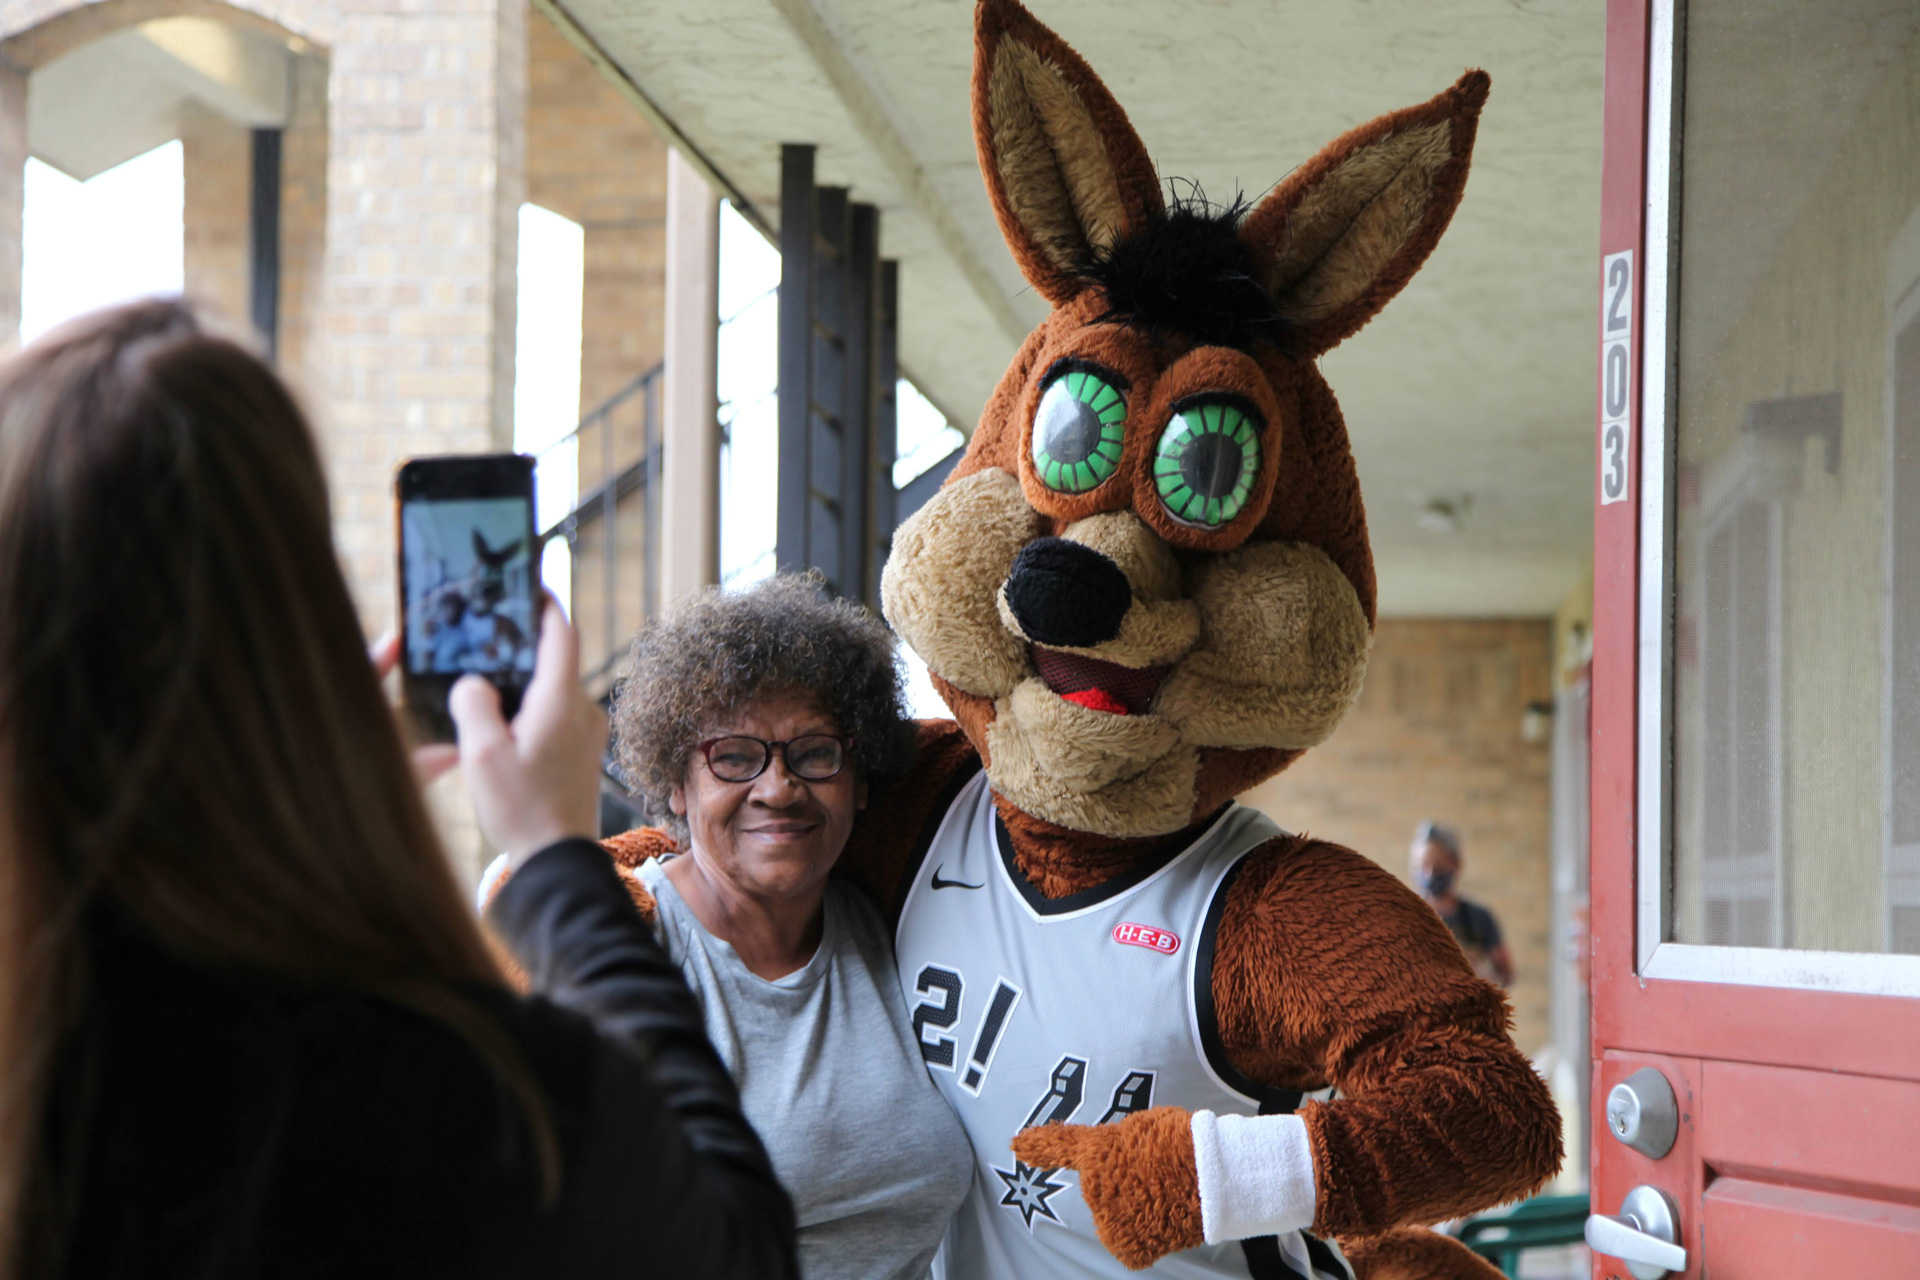 Spurs Coyote to Surprise Elderly with $100 Gift Cards